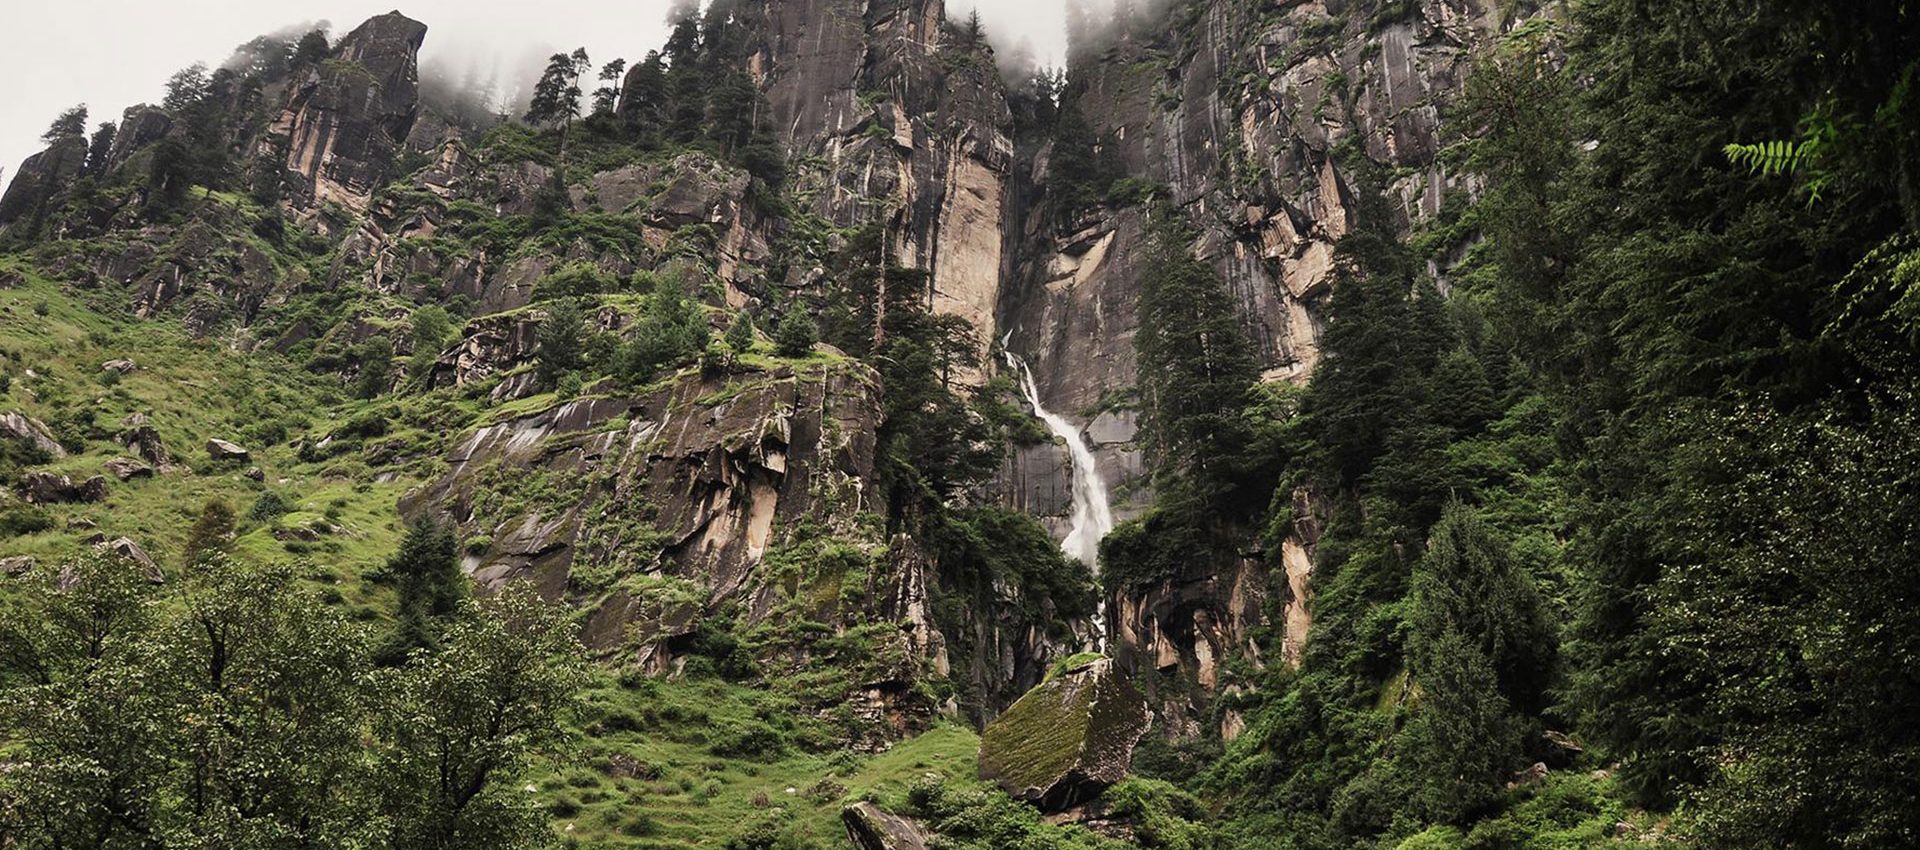 The landscape in Manali is a mix of rainforest with giant pine trees.